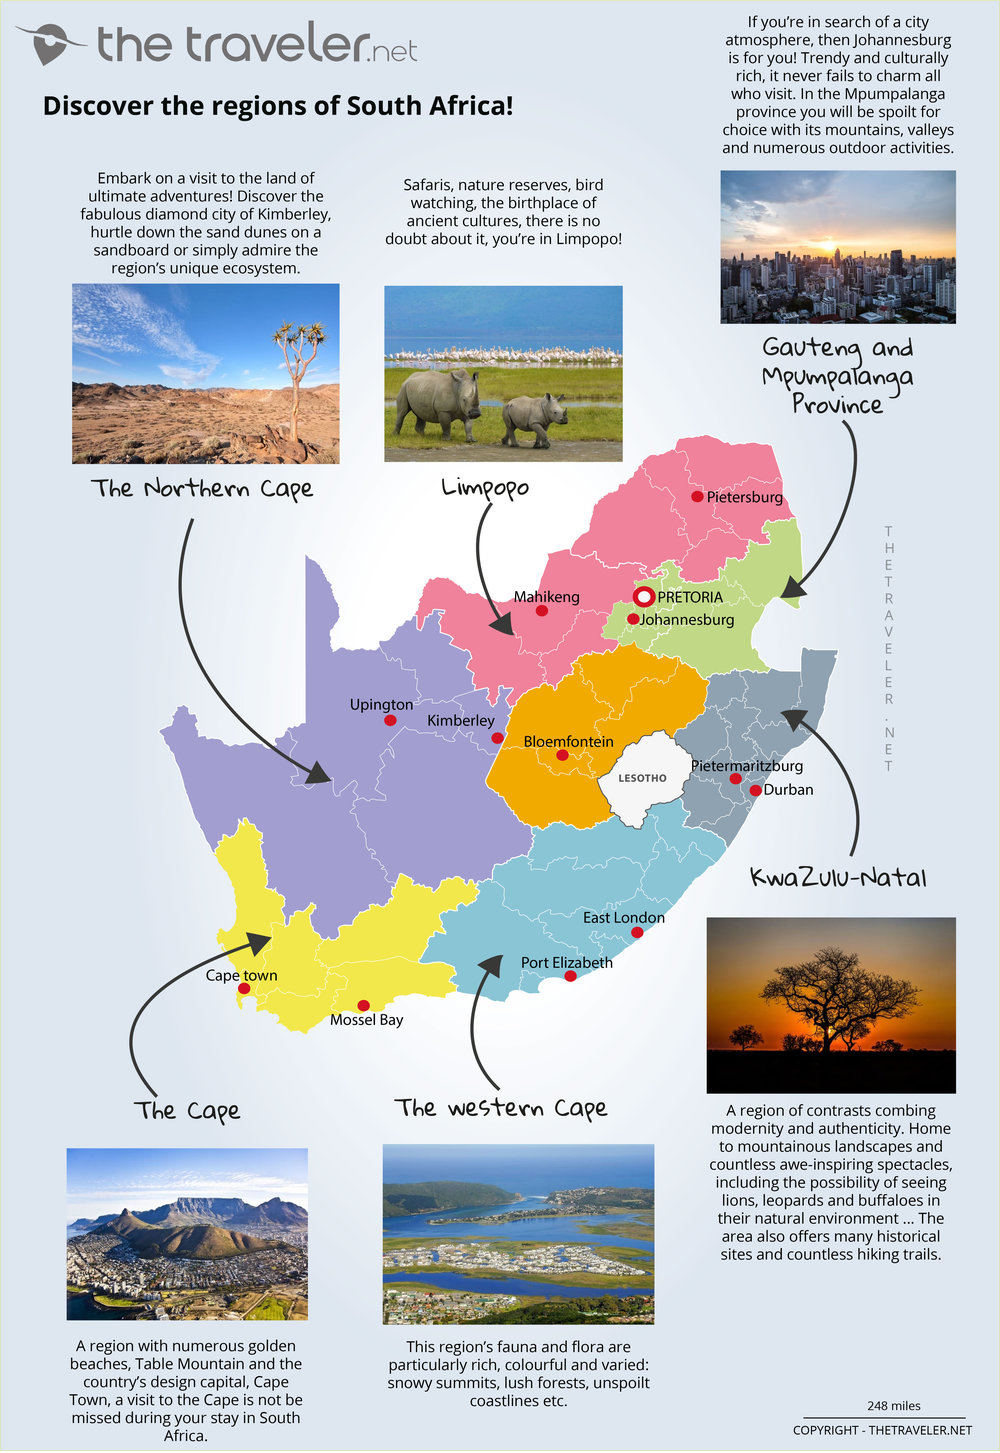 South Africa Tourist Attractions Map Places to visit South Africa: tourist maps and must see attractions